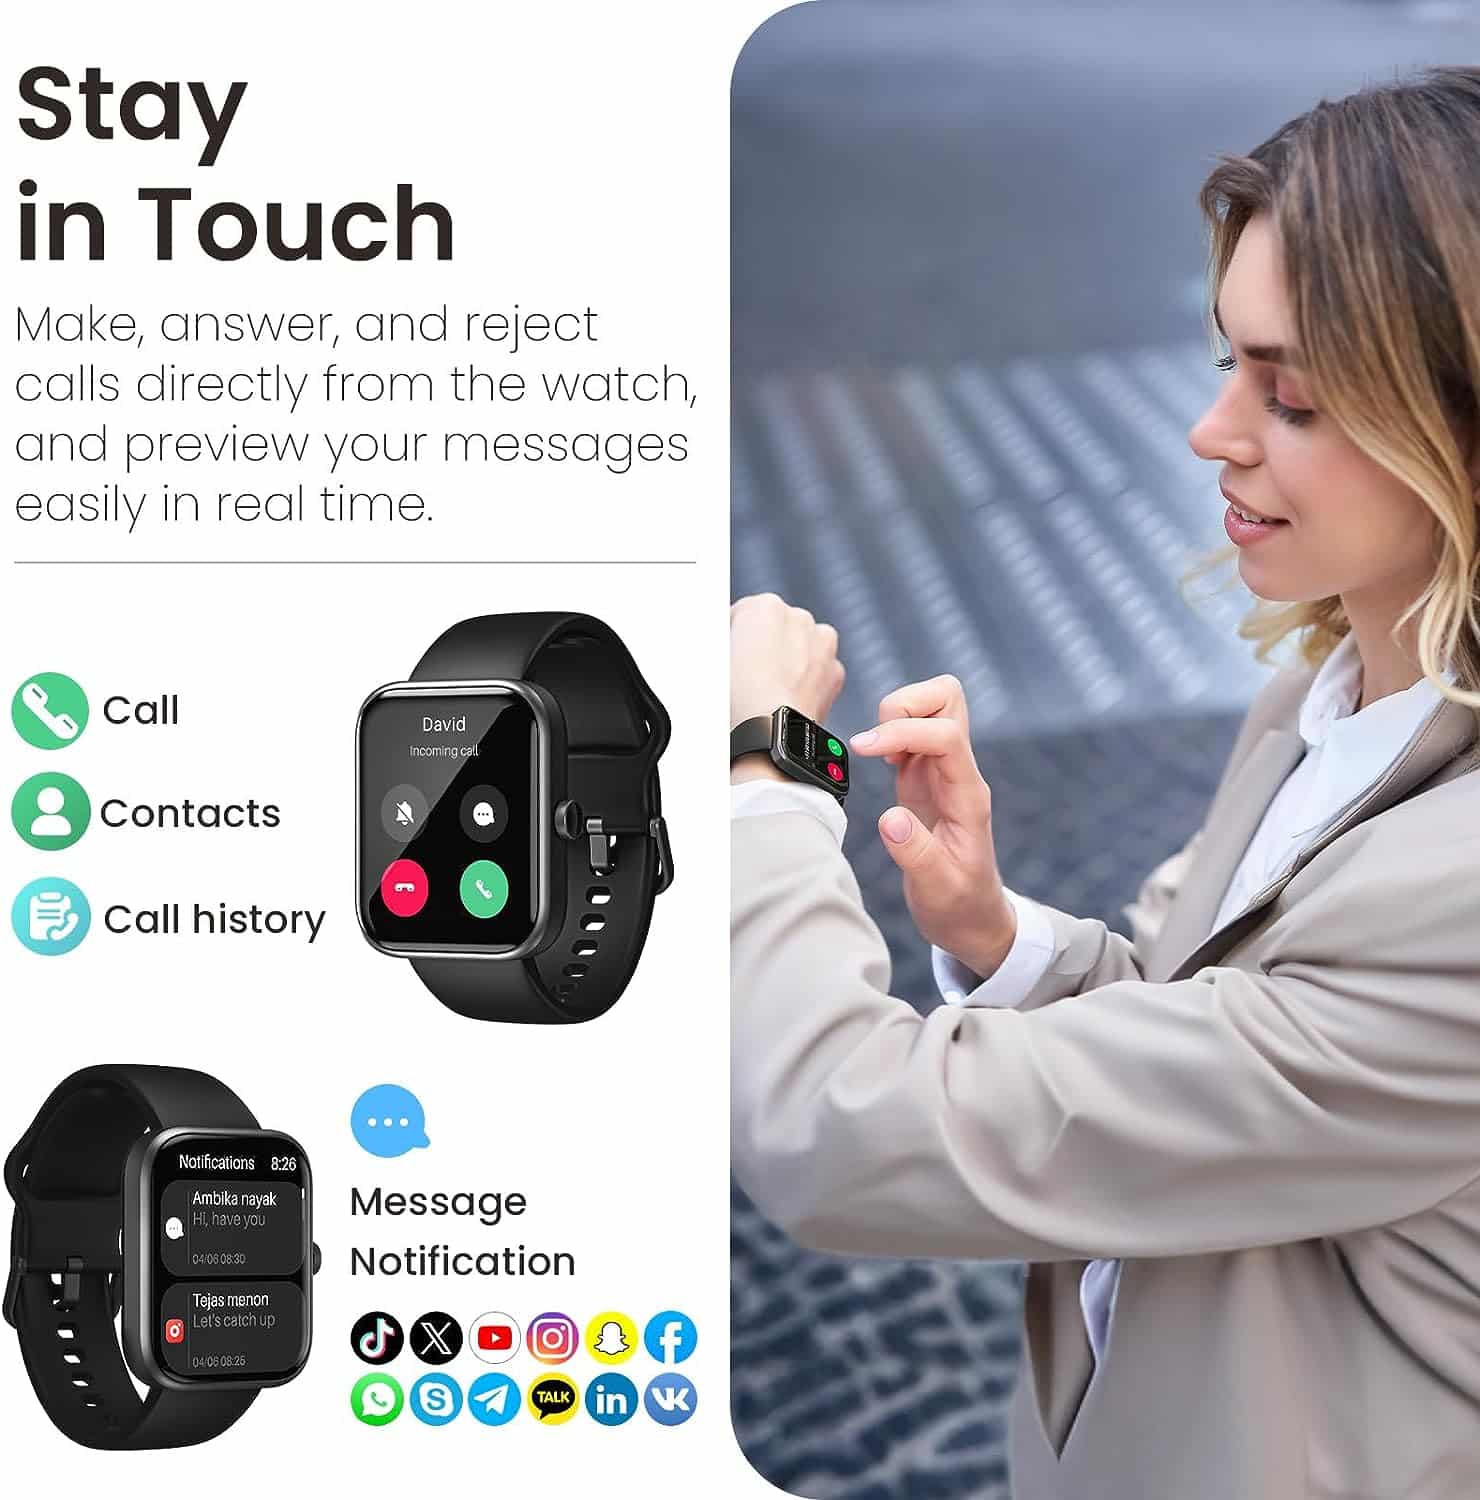 TOZO S3 Smart Watch: The Ultimate Companion for a Connected Lifestyle